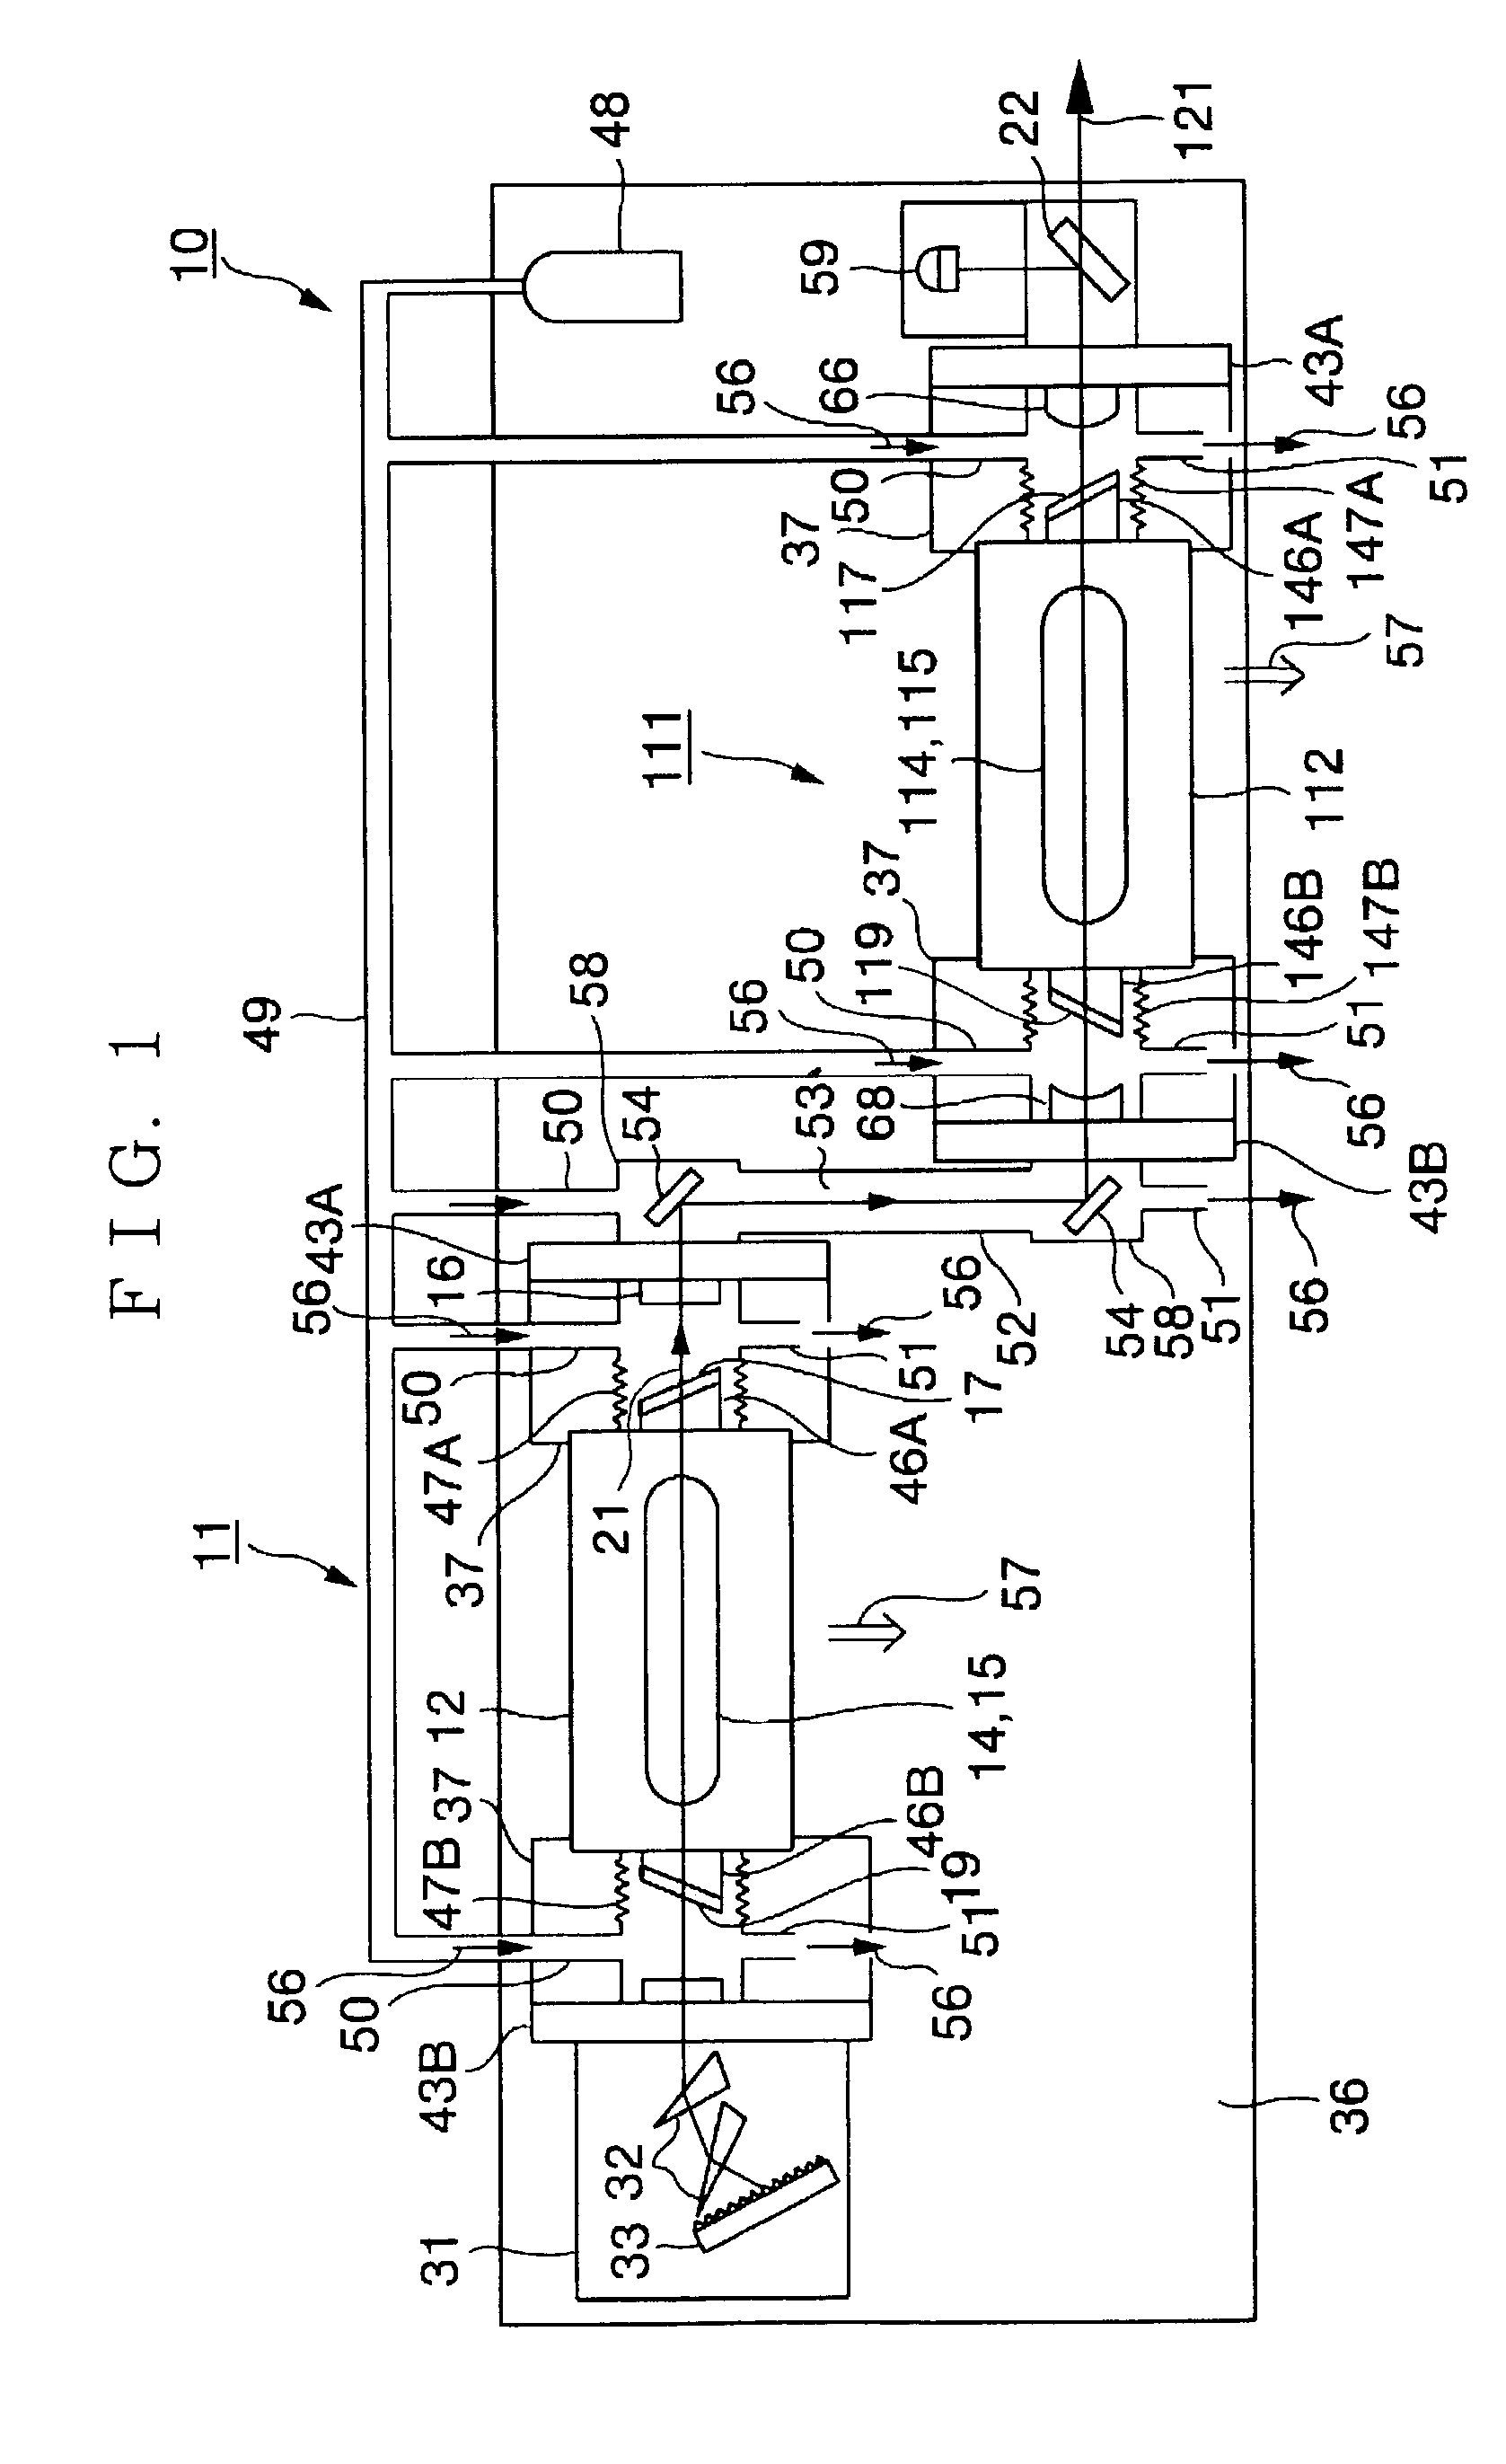 Injection locking type or MOPA type of gas laser device